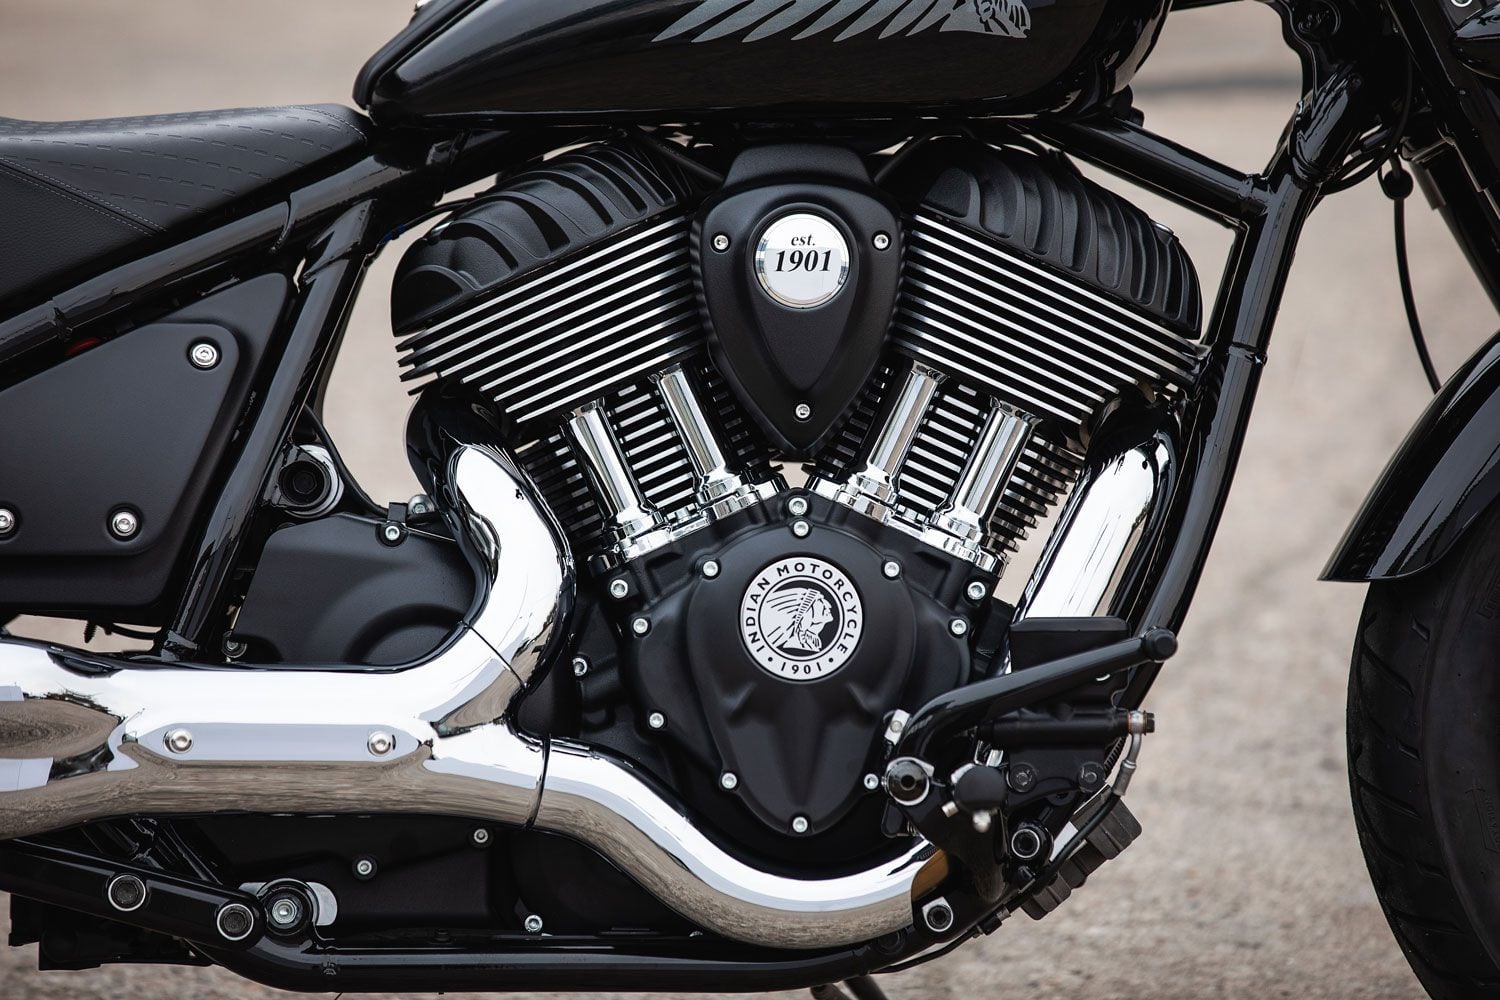 The Thunder Stroke engine (in 111 or 116 sizes) lives in all versions of the new Chief.